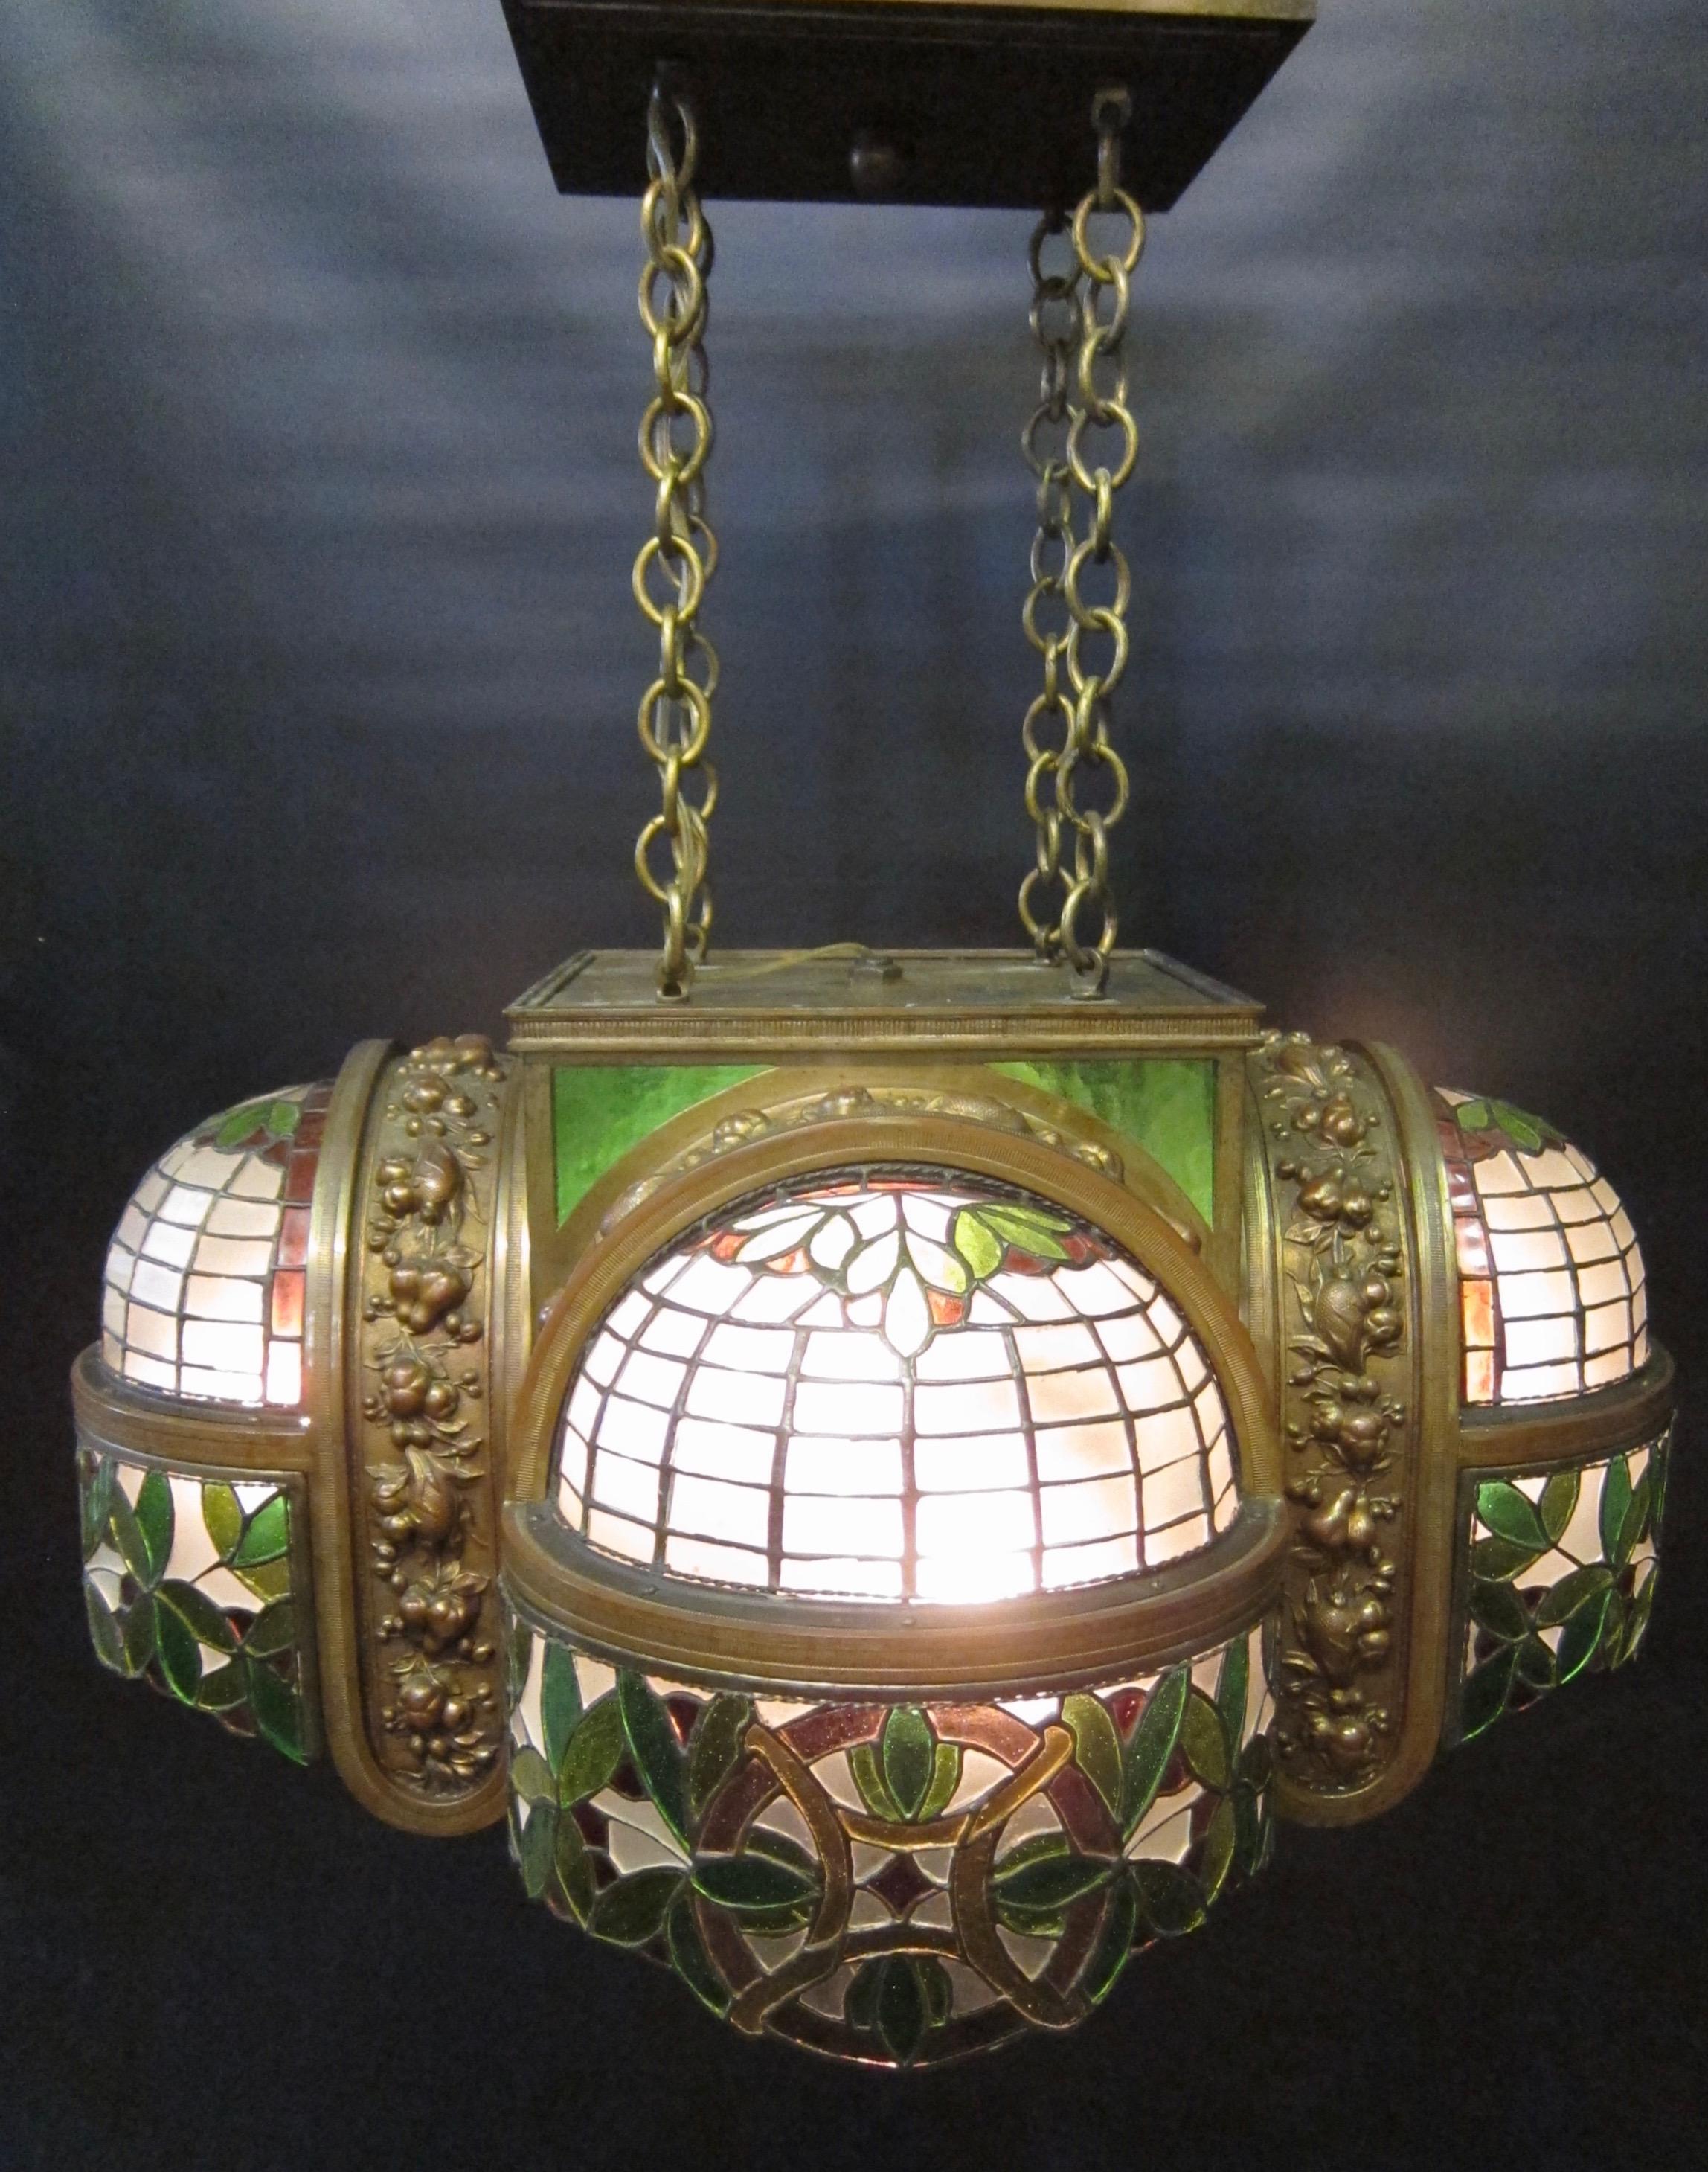 Vintage Bronze and Leaded Glass 1920s-1930s Ceiling Fixture For Sale 3